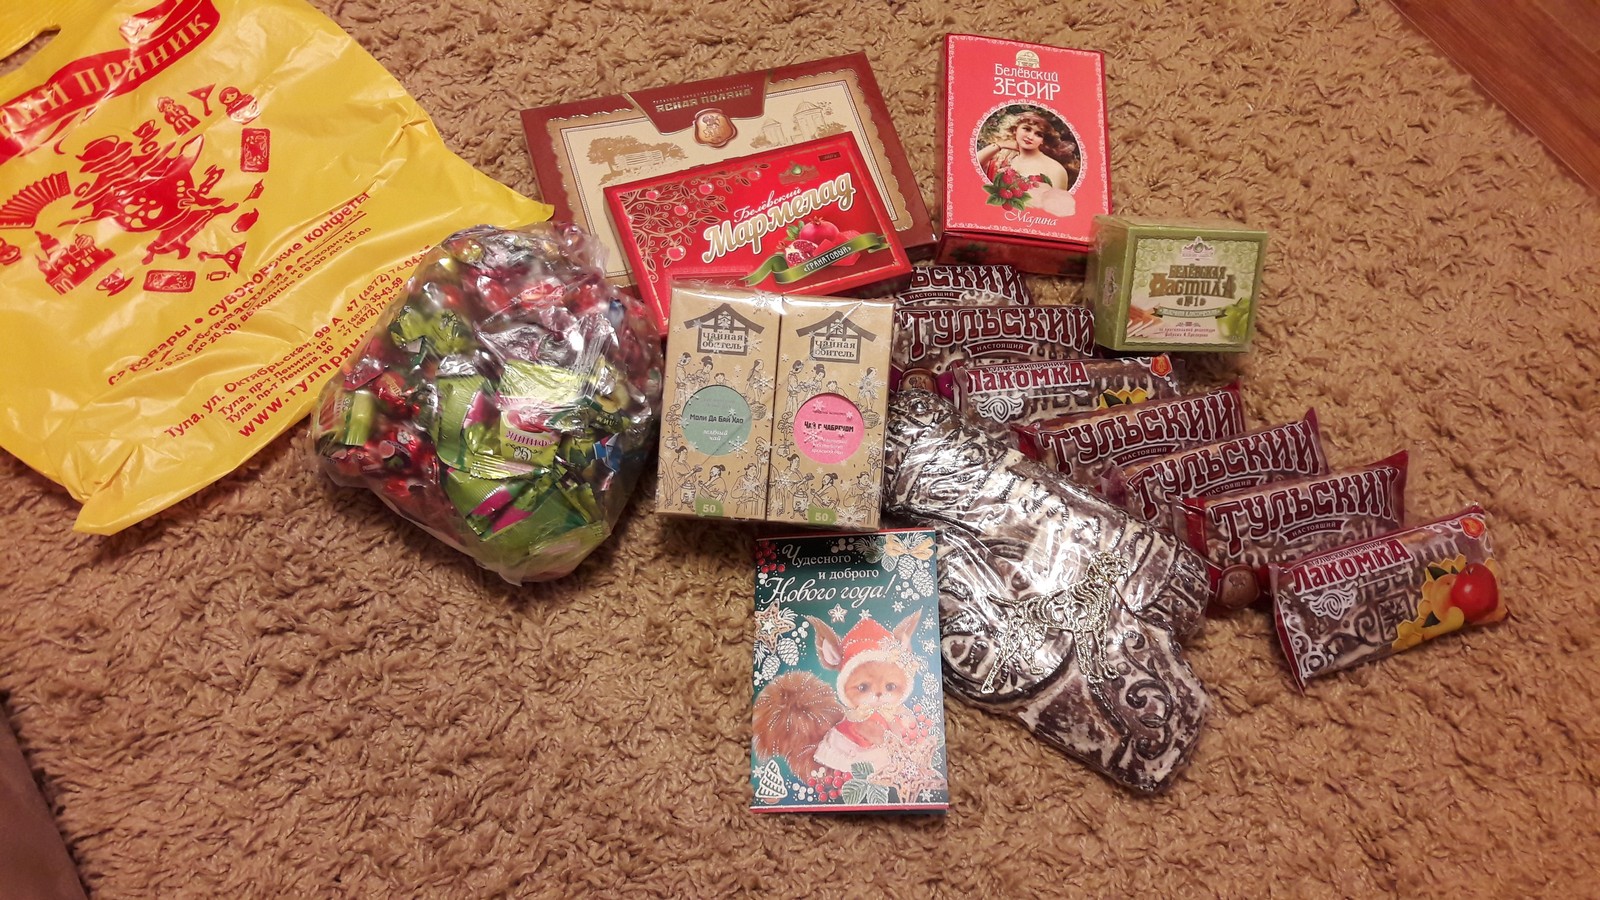 From Tula to Surgut, faith in Santa Claus has been restored! - Presents, Father Frost, Altruism, New Year's gift exchange, Longpost, Secret Santa, 